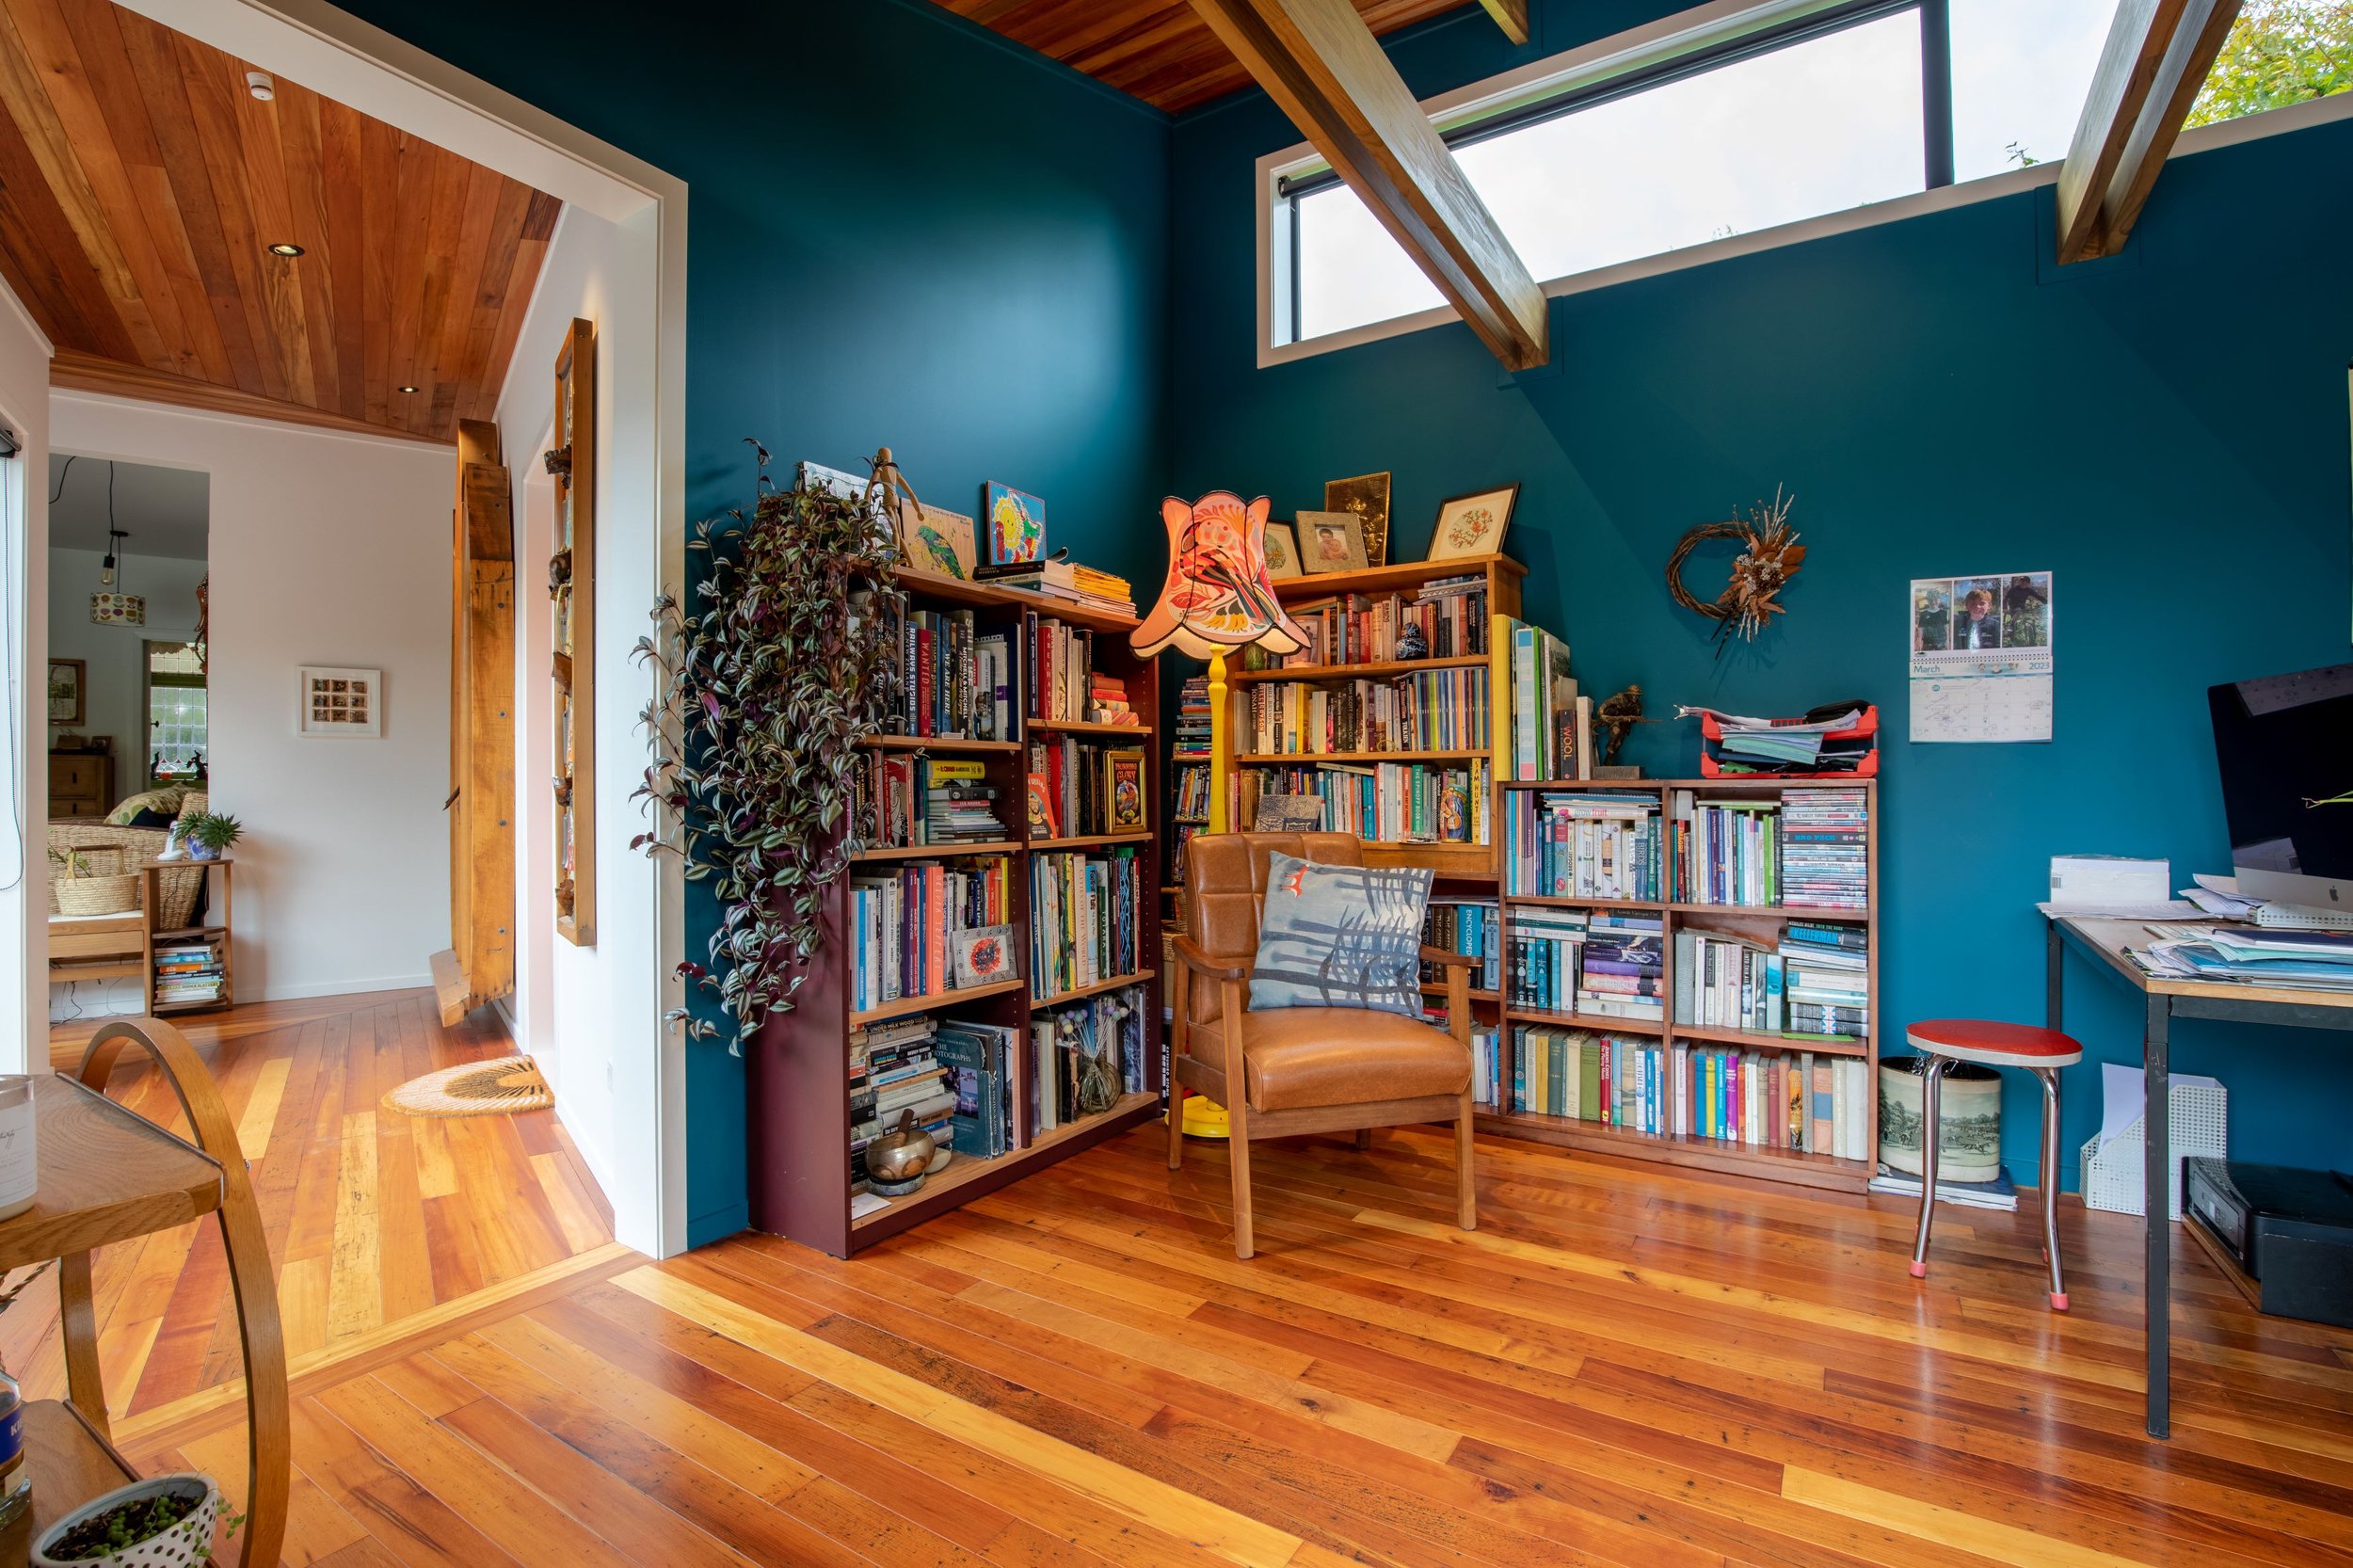 Walls in Resene Teal and a retro floor lamp in this reading corner.jpg